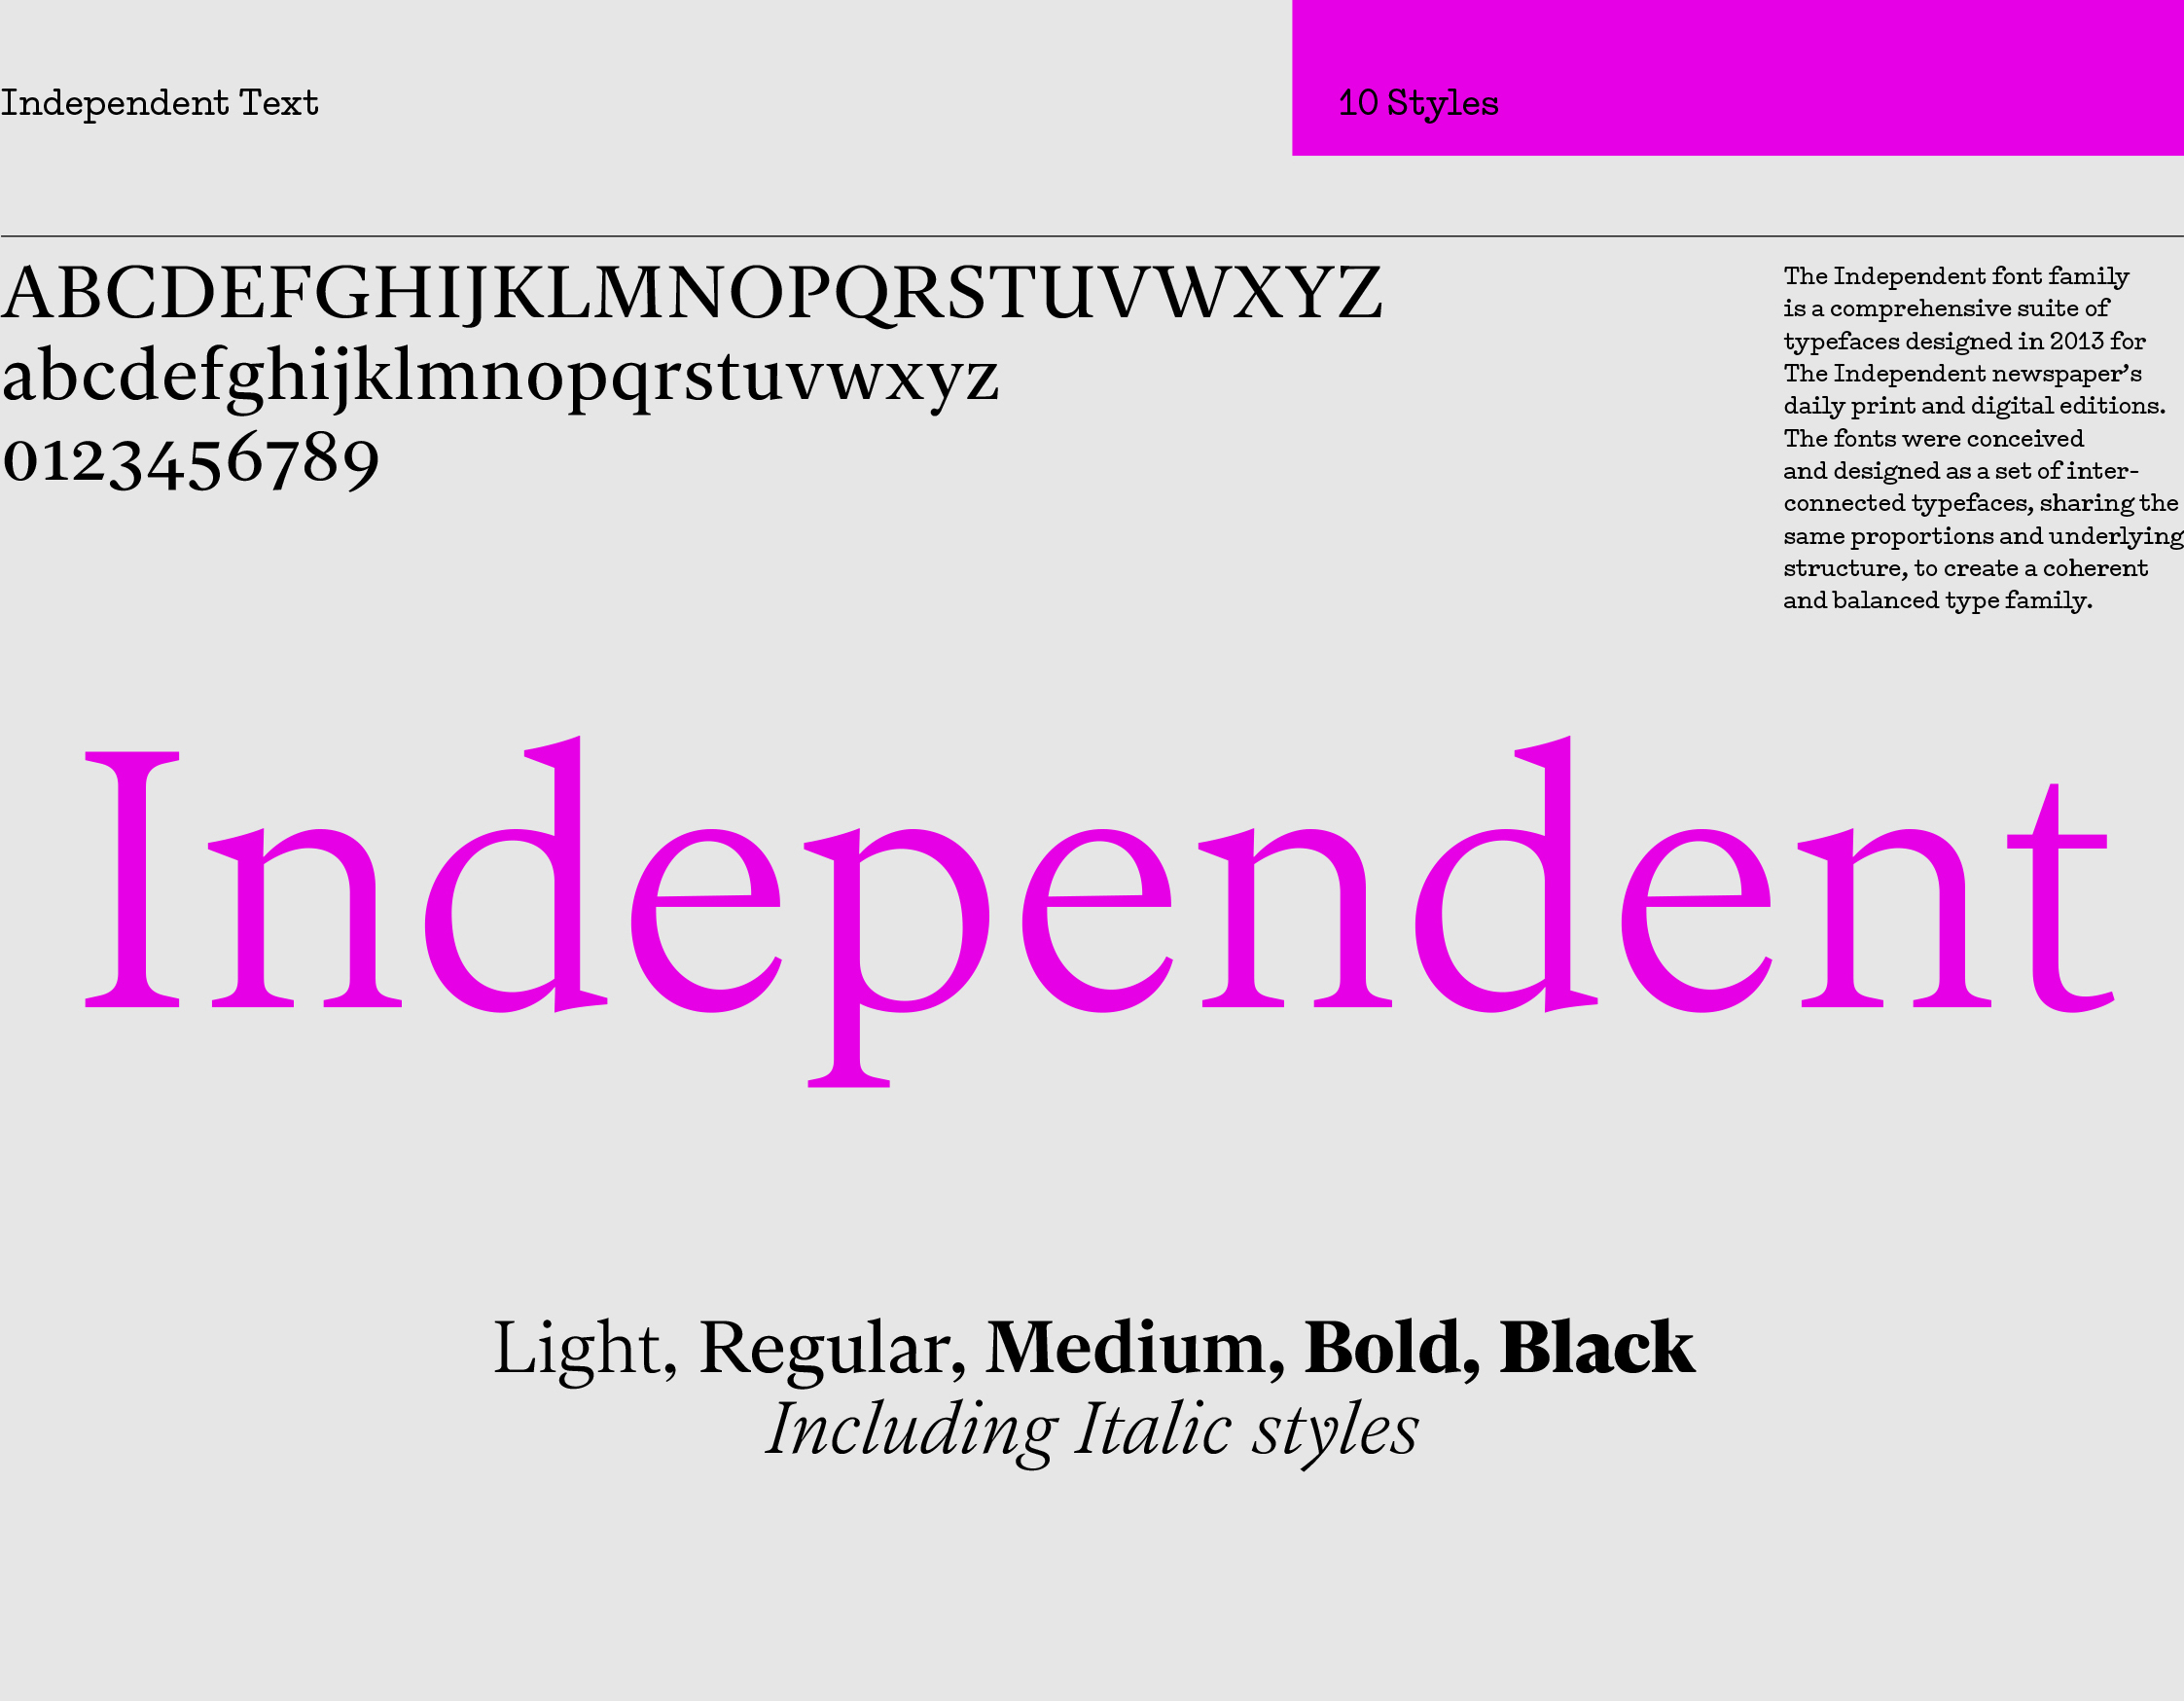 Independent Text sample